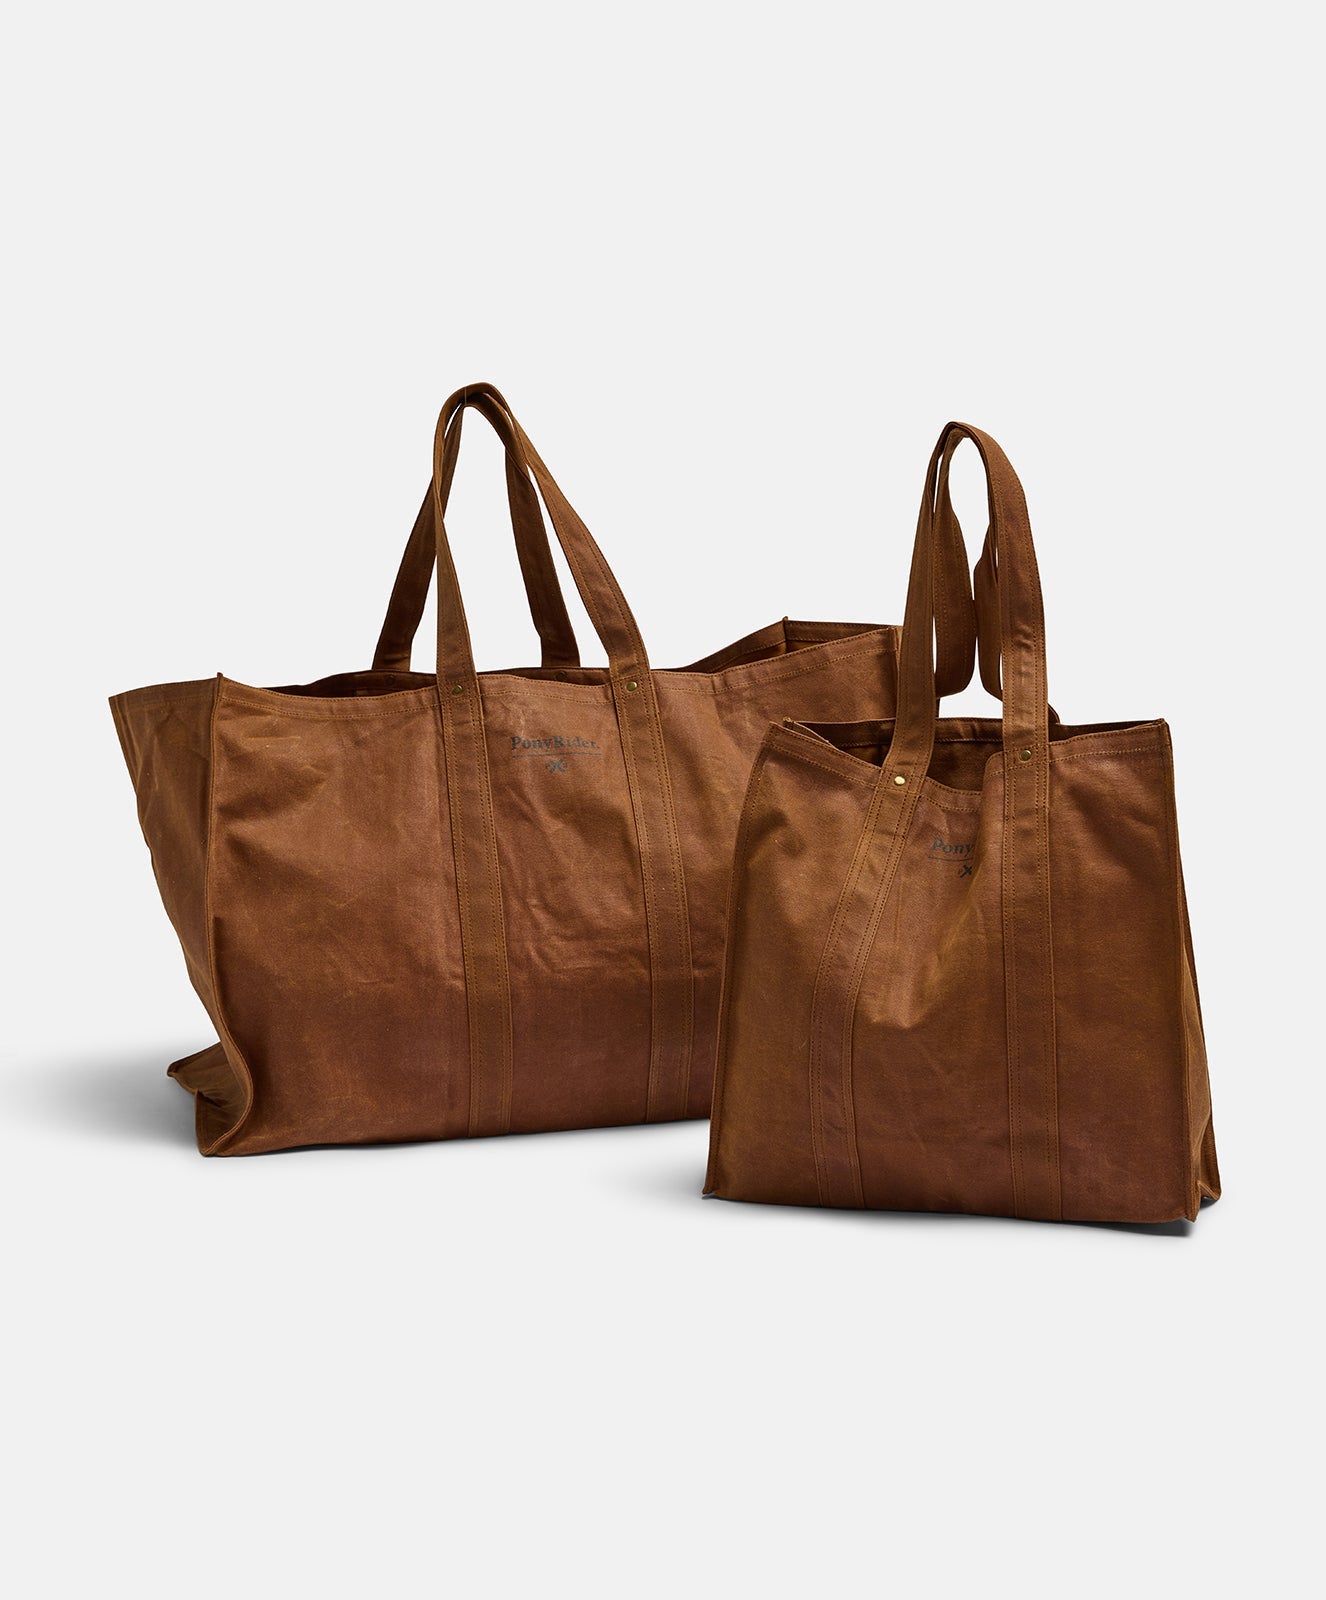 Market Carry All Canvas Tote Bag | Spice